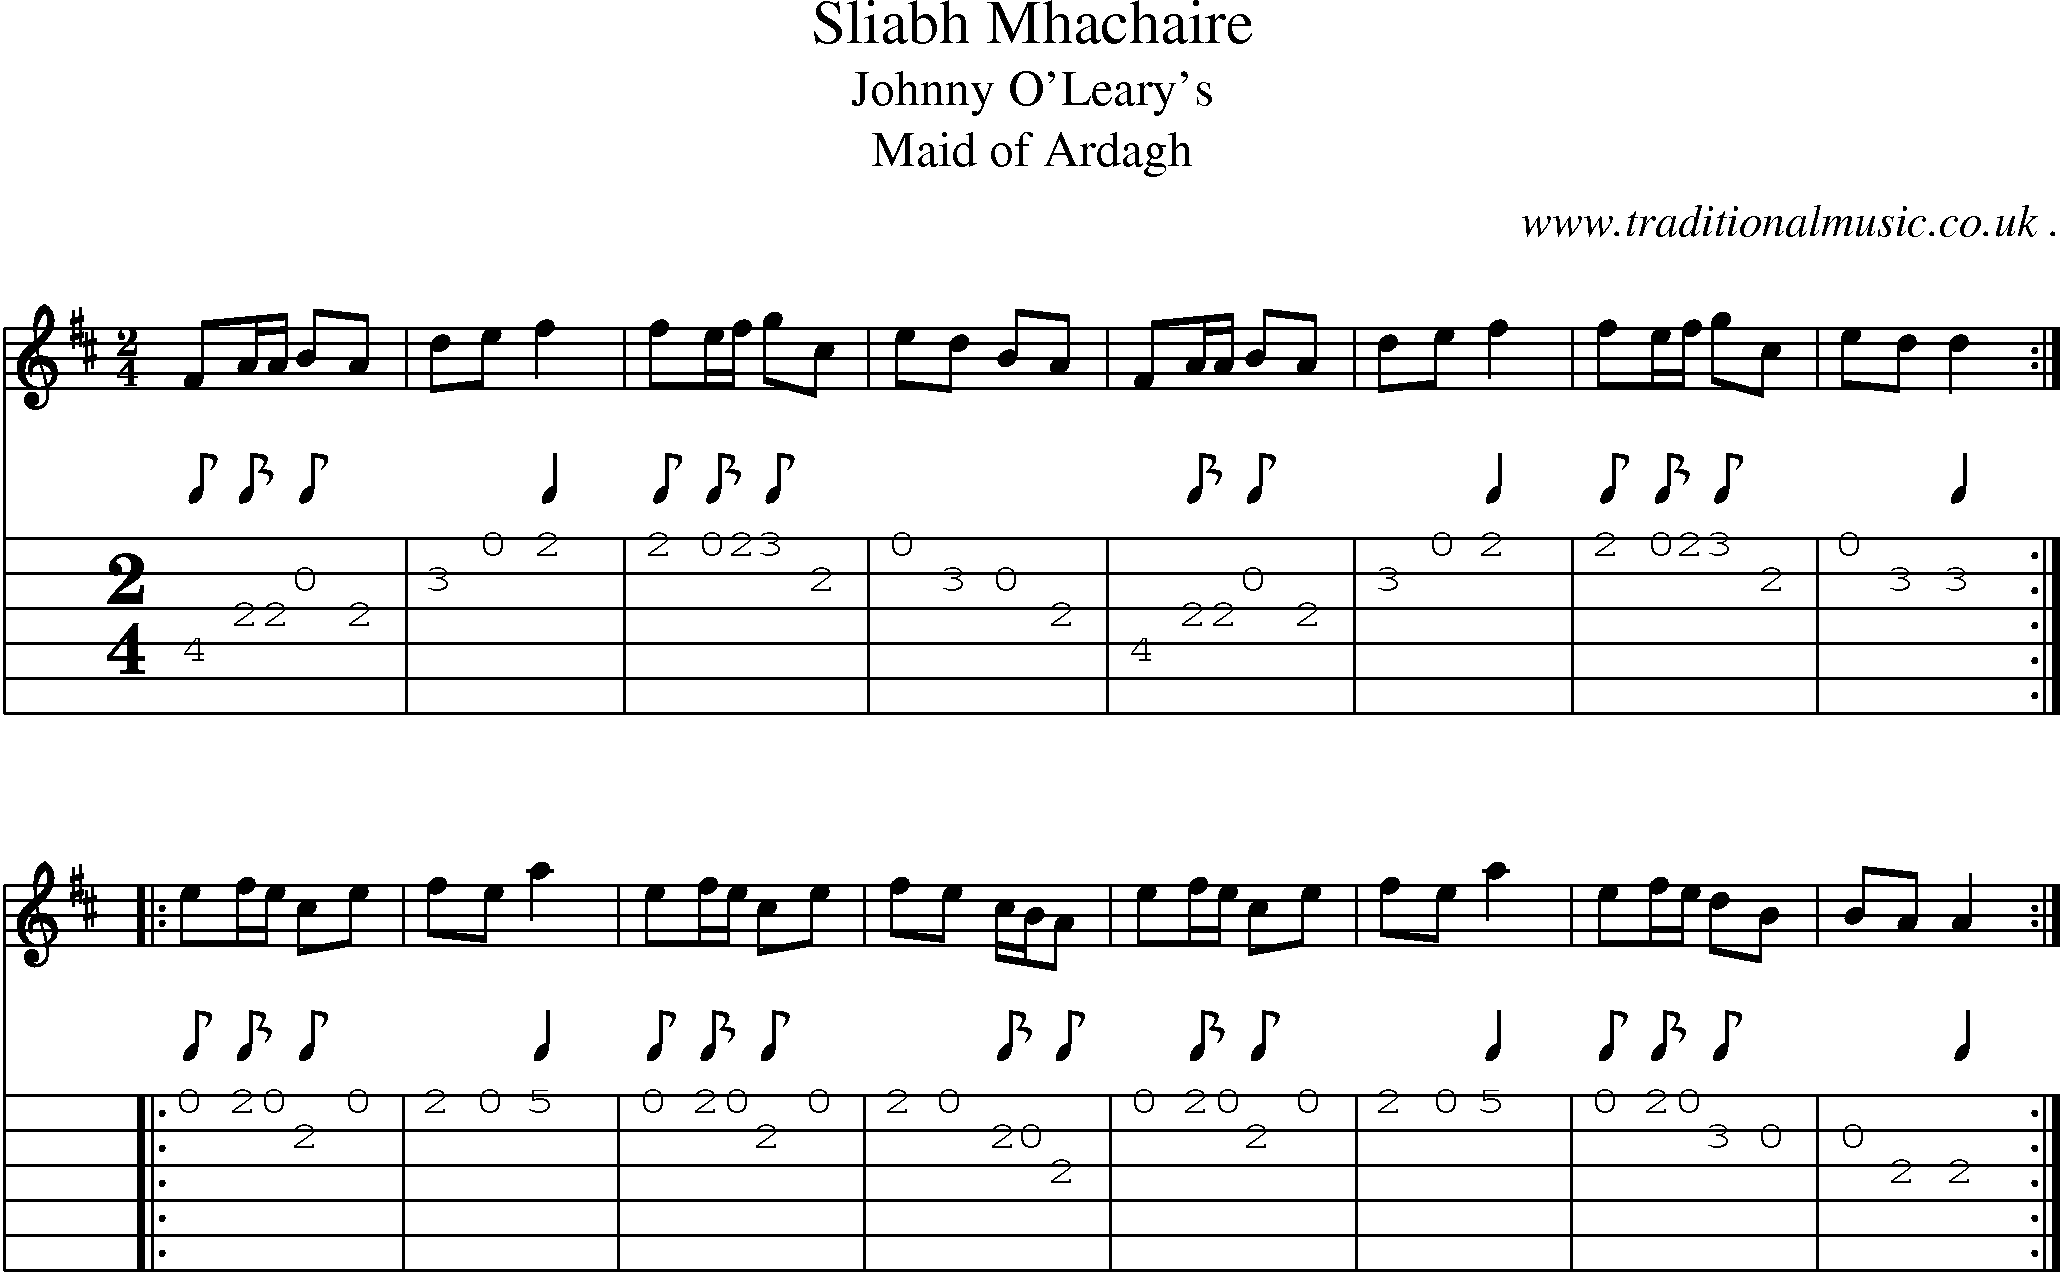 Sheet-Music and Guitar Tabs for Sliabh Mhachaire